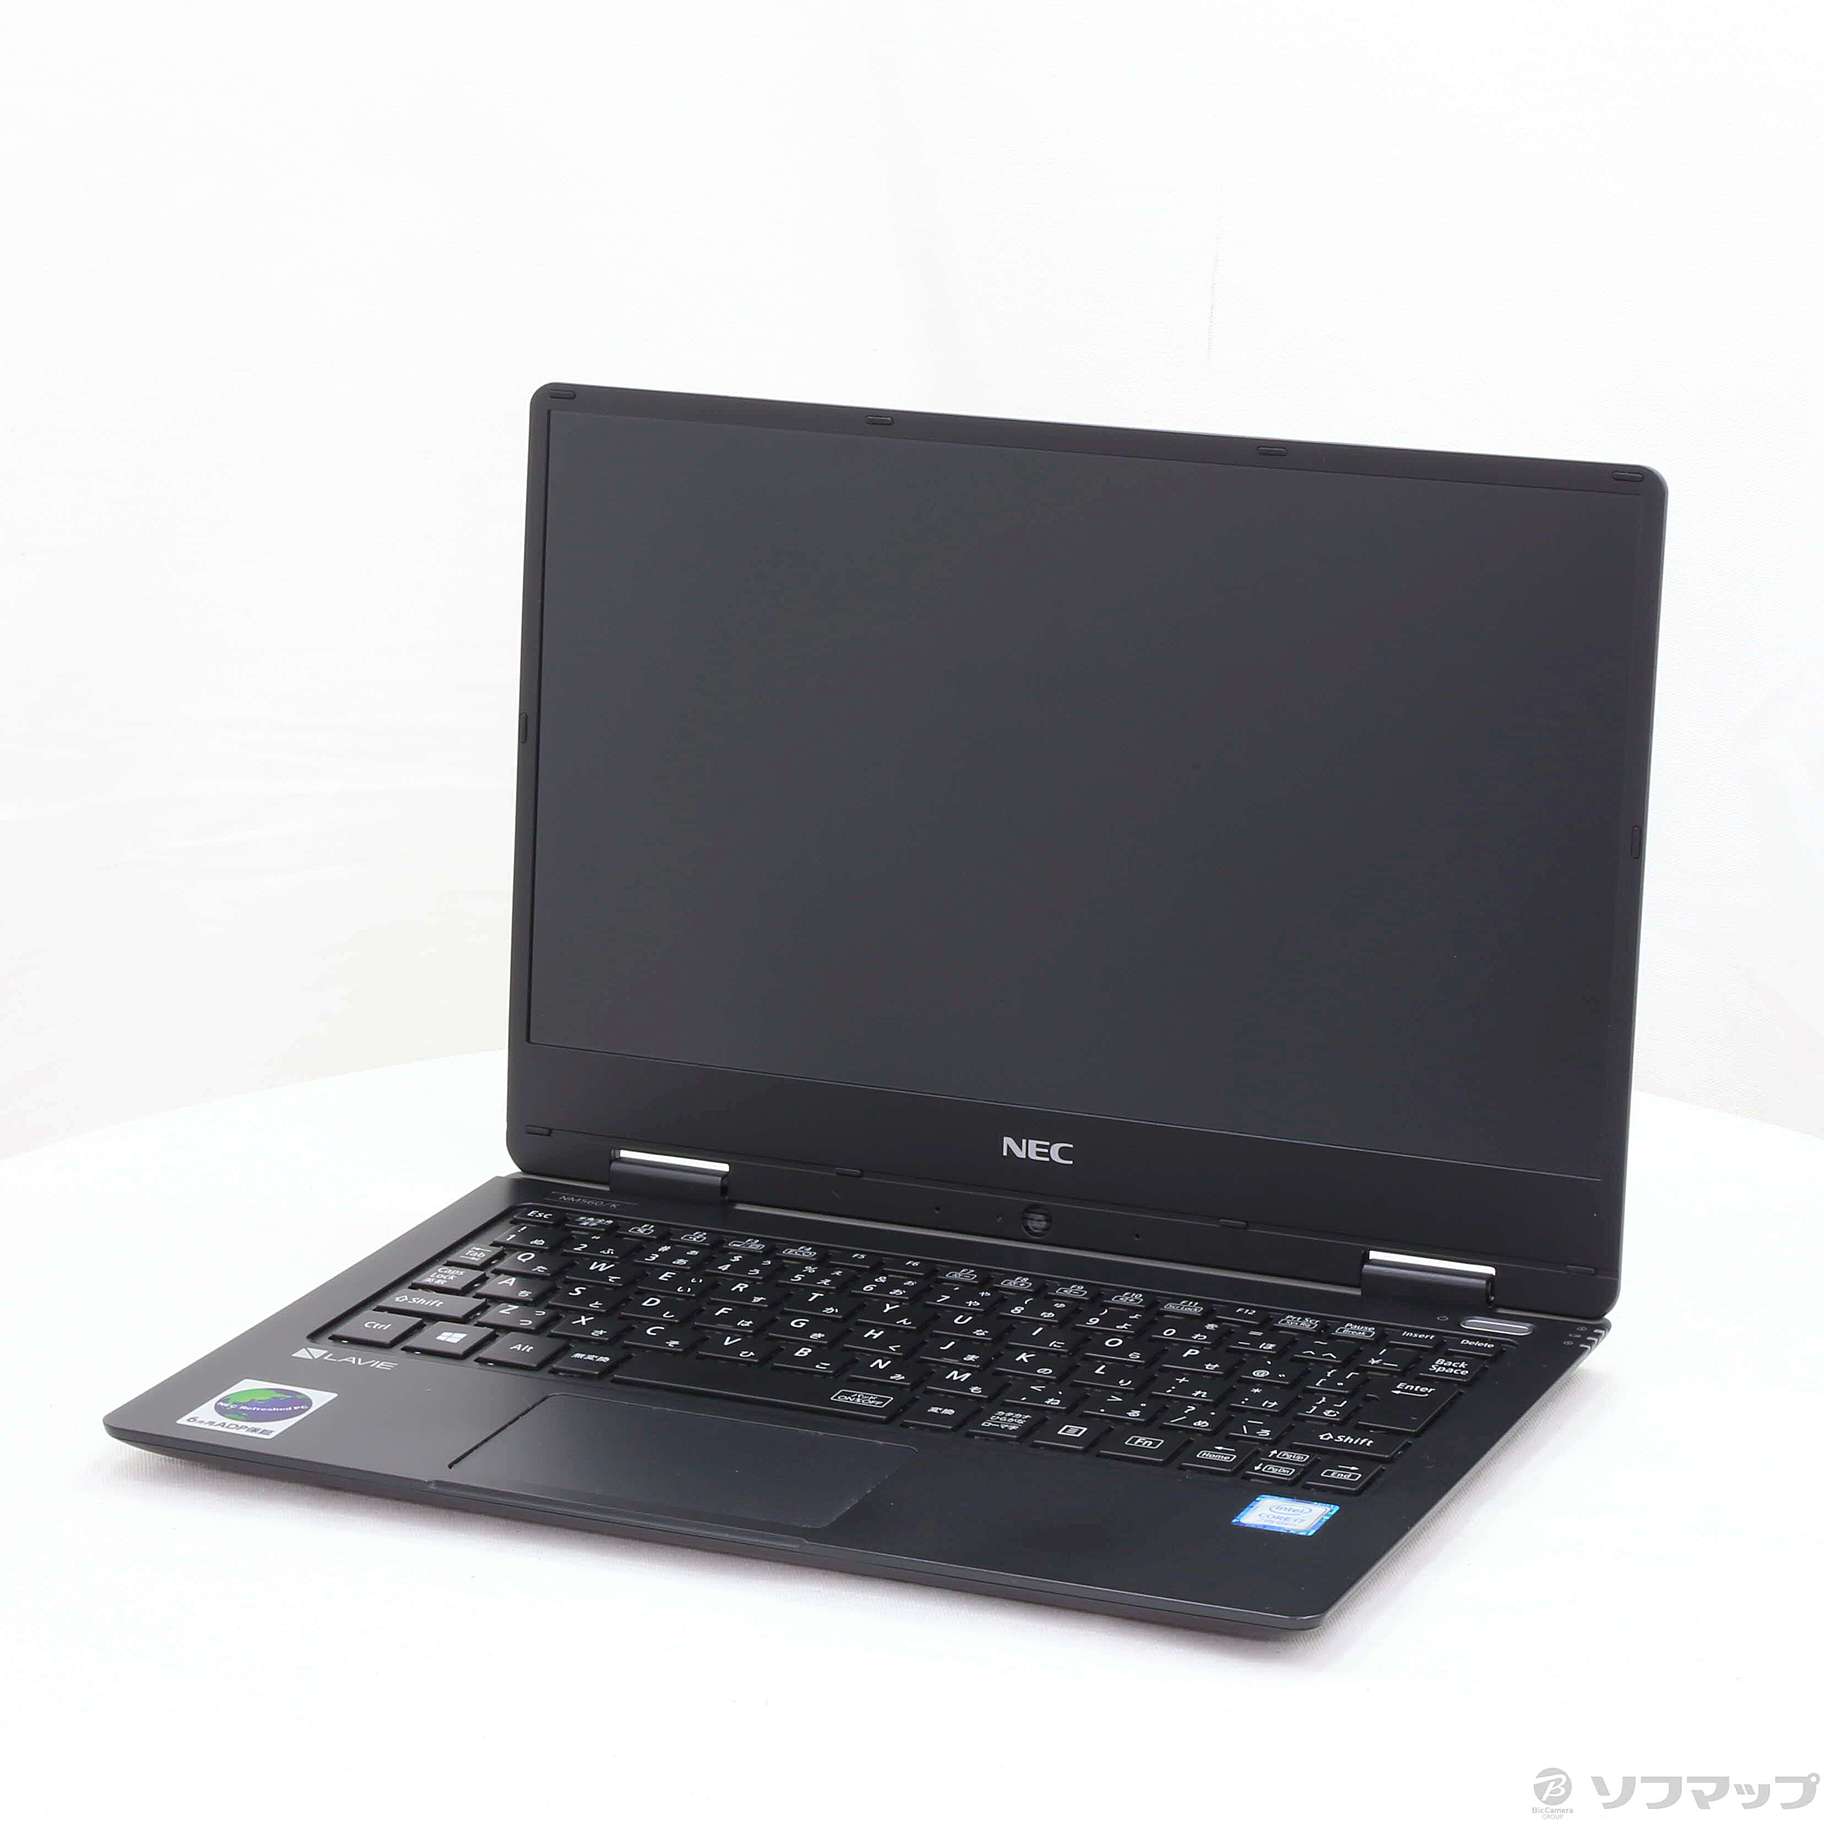 LaVie Note Mobile PC-NM560KAB-E1 パールブラック 〔NEC Refreshed PC〕 〔Windows 10〕  〔Office付〕 ≪メーカー保証あり≫